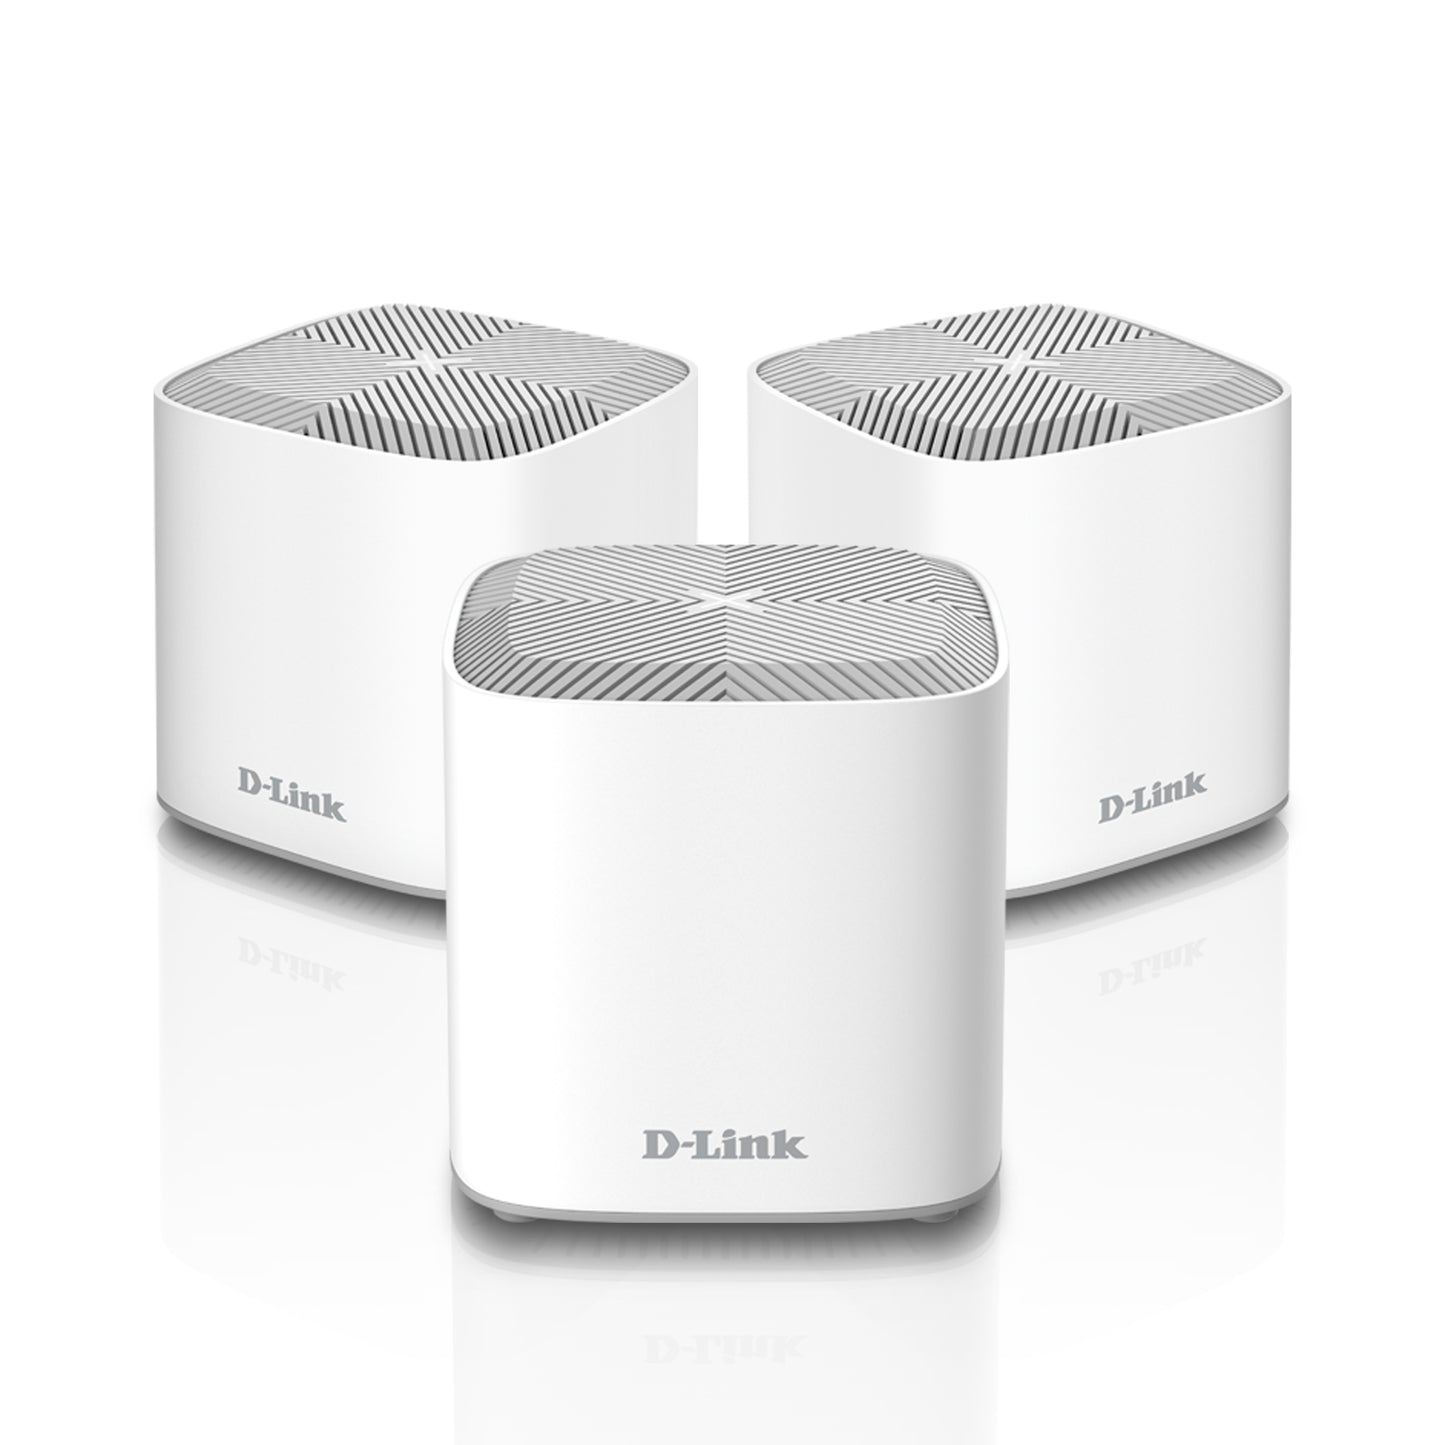 AX1800 Dual-Band Whole Home Mesh Wi-Fi 6 System - 3-pack - COVR-X1863